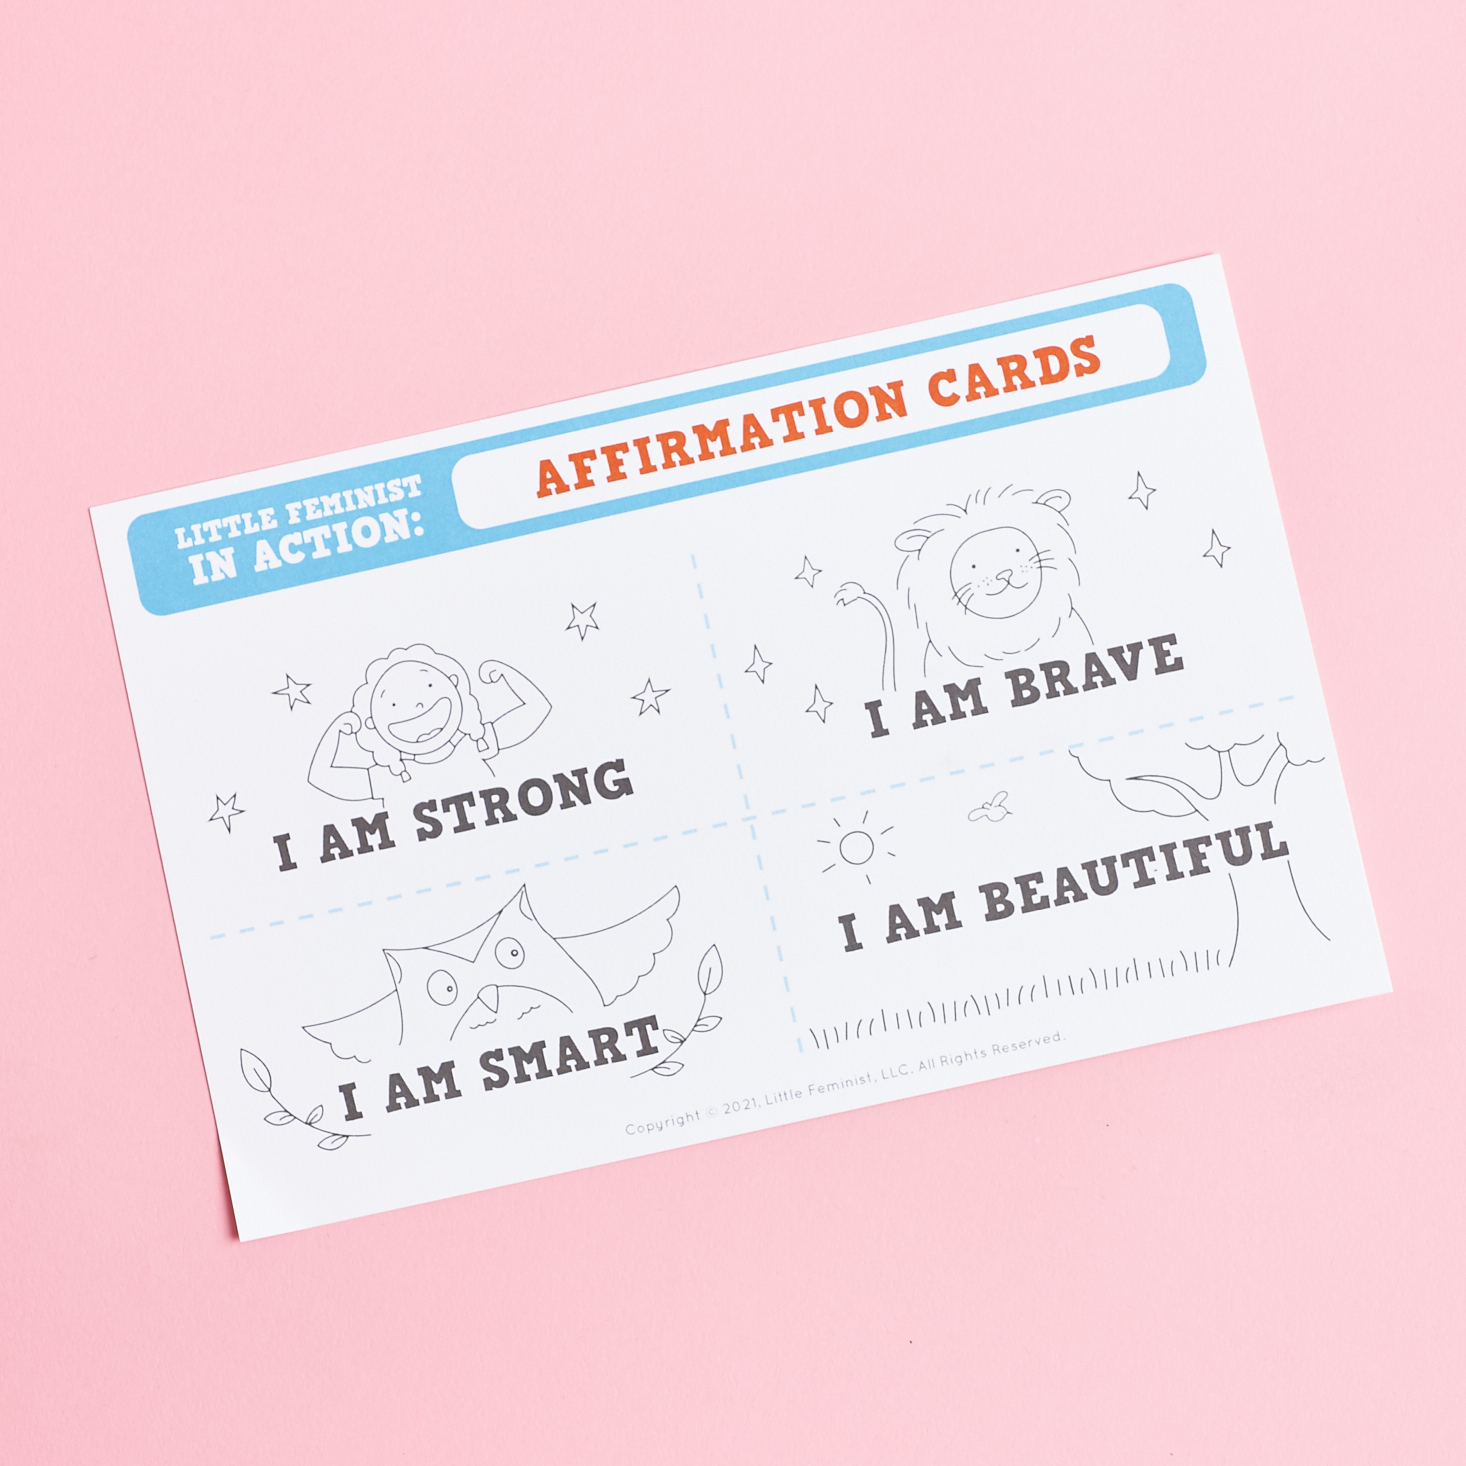 two affirmation cards